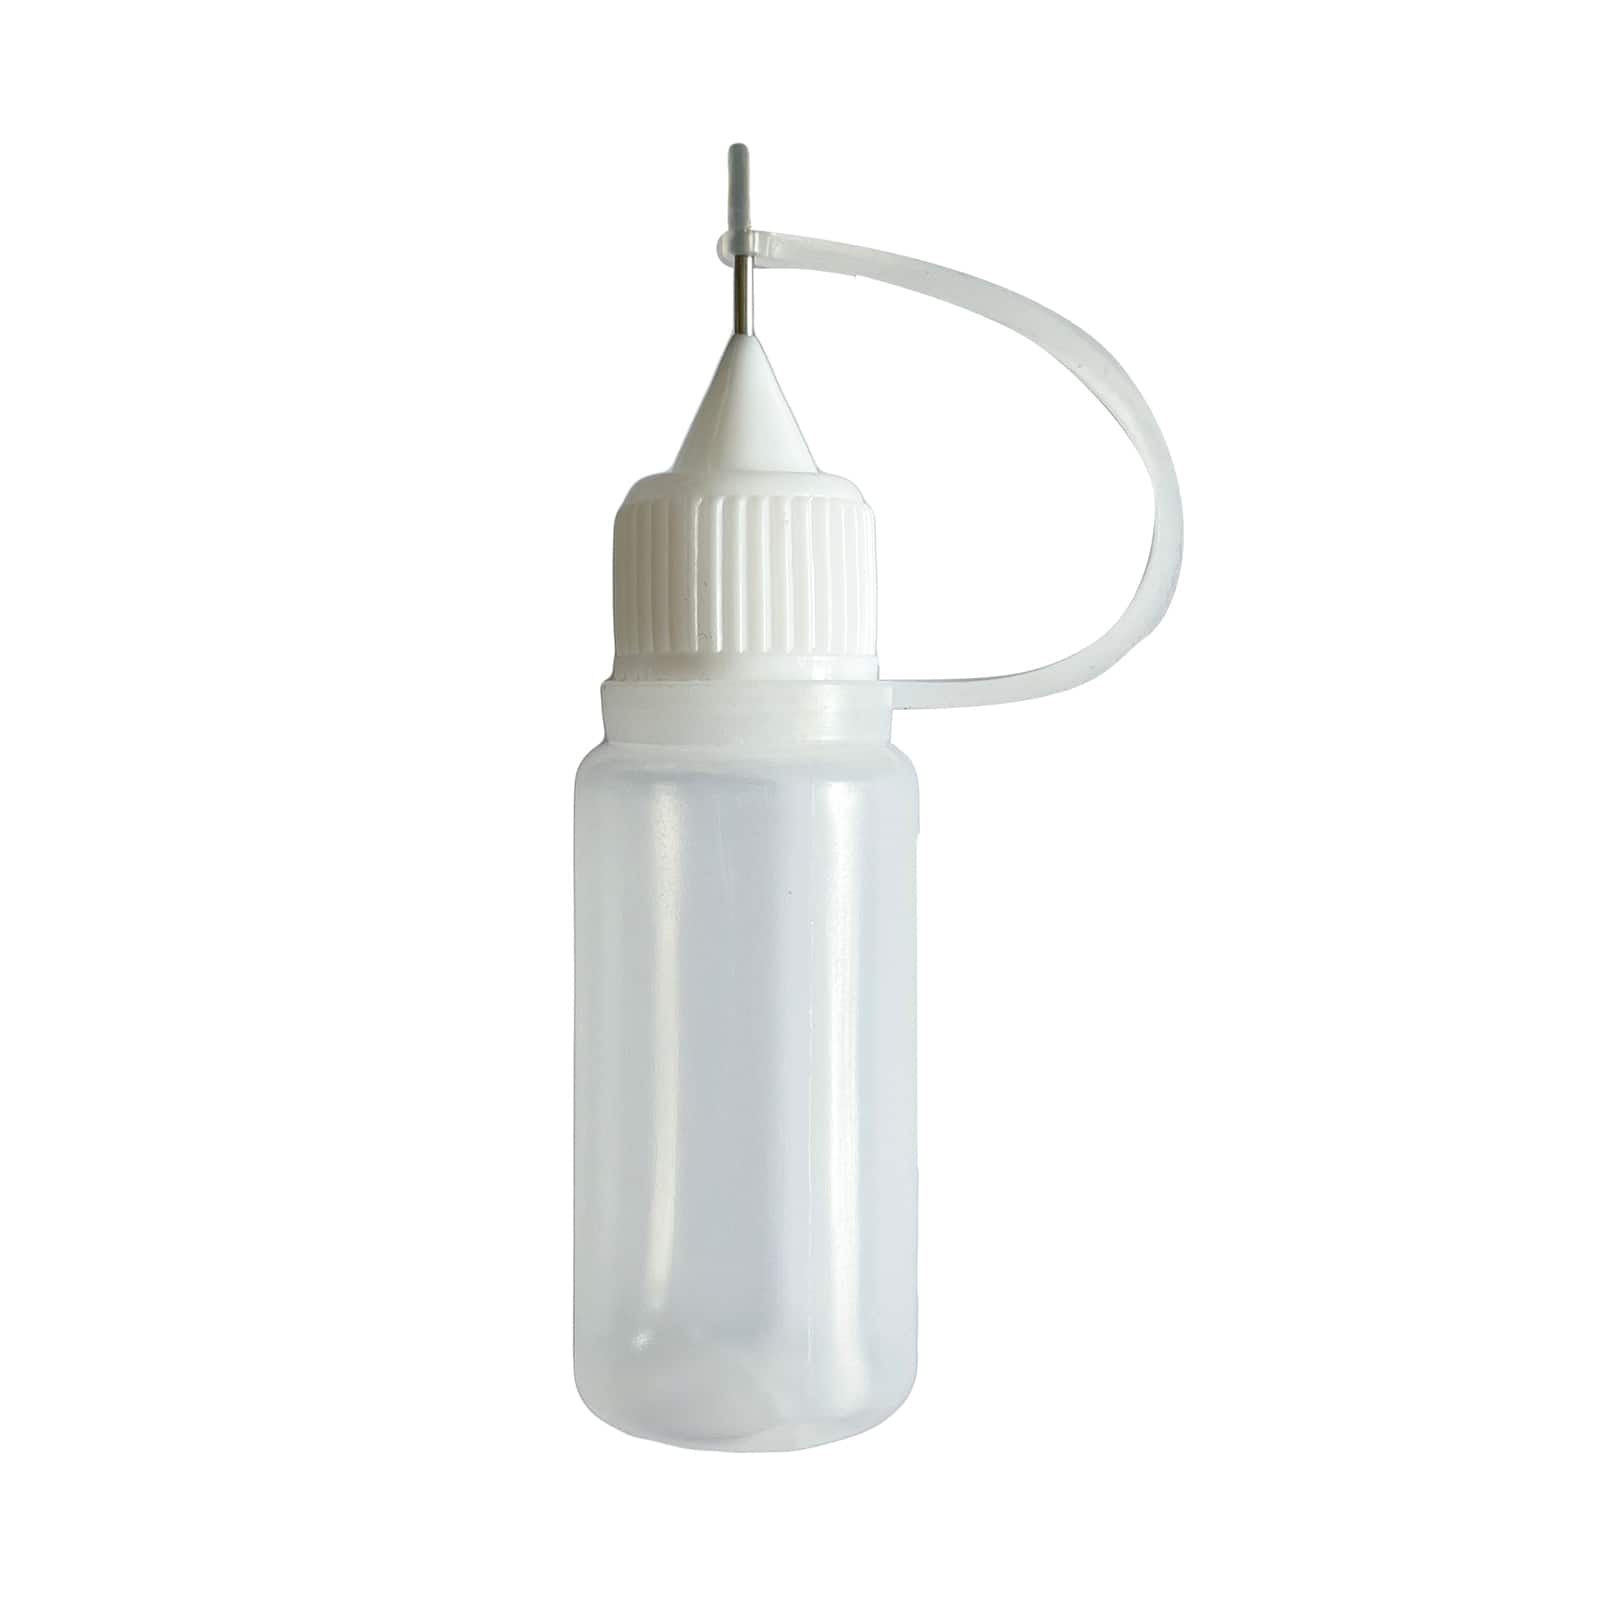 Metal Tip Bottles by Recollections™, 4ct.